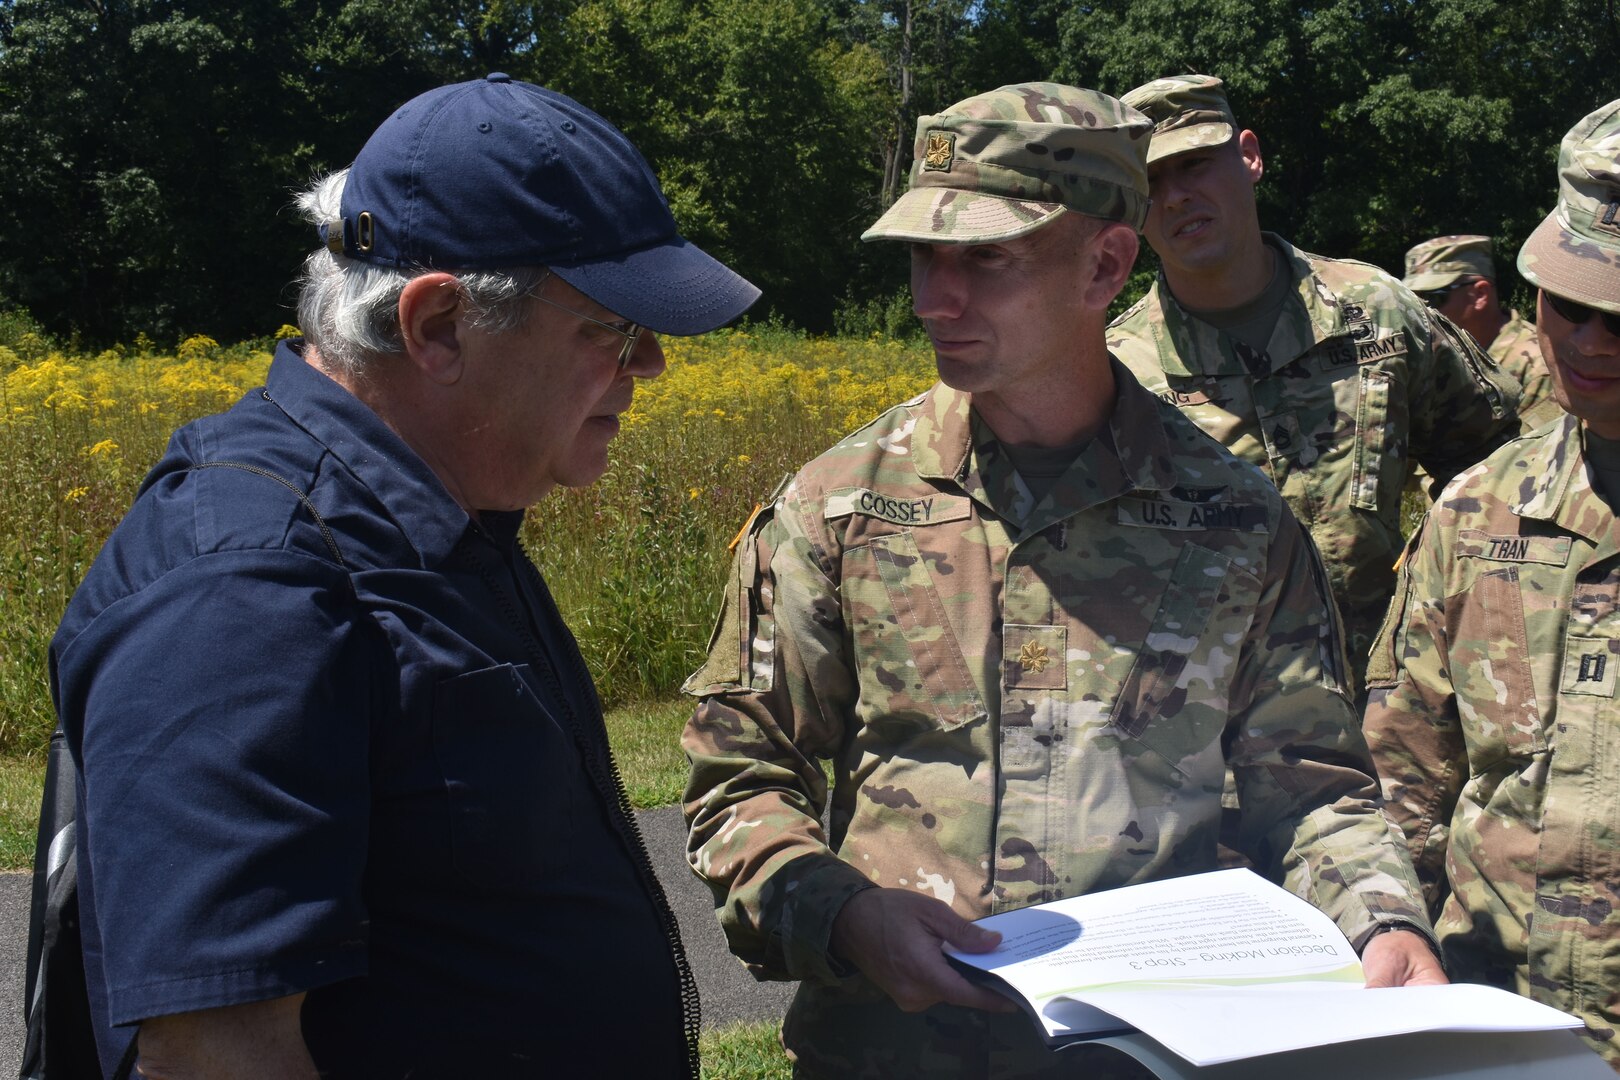 New York Army National Guard Maj. Jason Cossey speaks with James Hughto on a training exercise, at Saratoga Battlefield, Saratoga, N.Y., on Aug. 14, 2019. Cossey and other Soldiers were participating in the Commander’s Career Course, and getting a tour of Saratoga Battlefield.